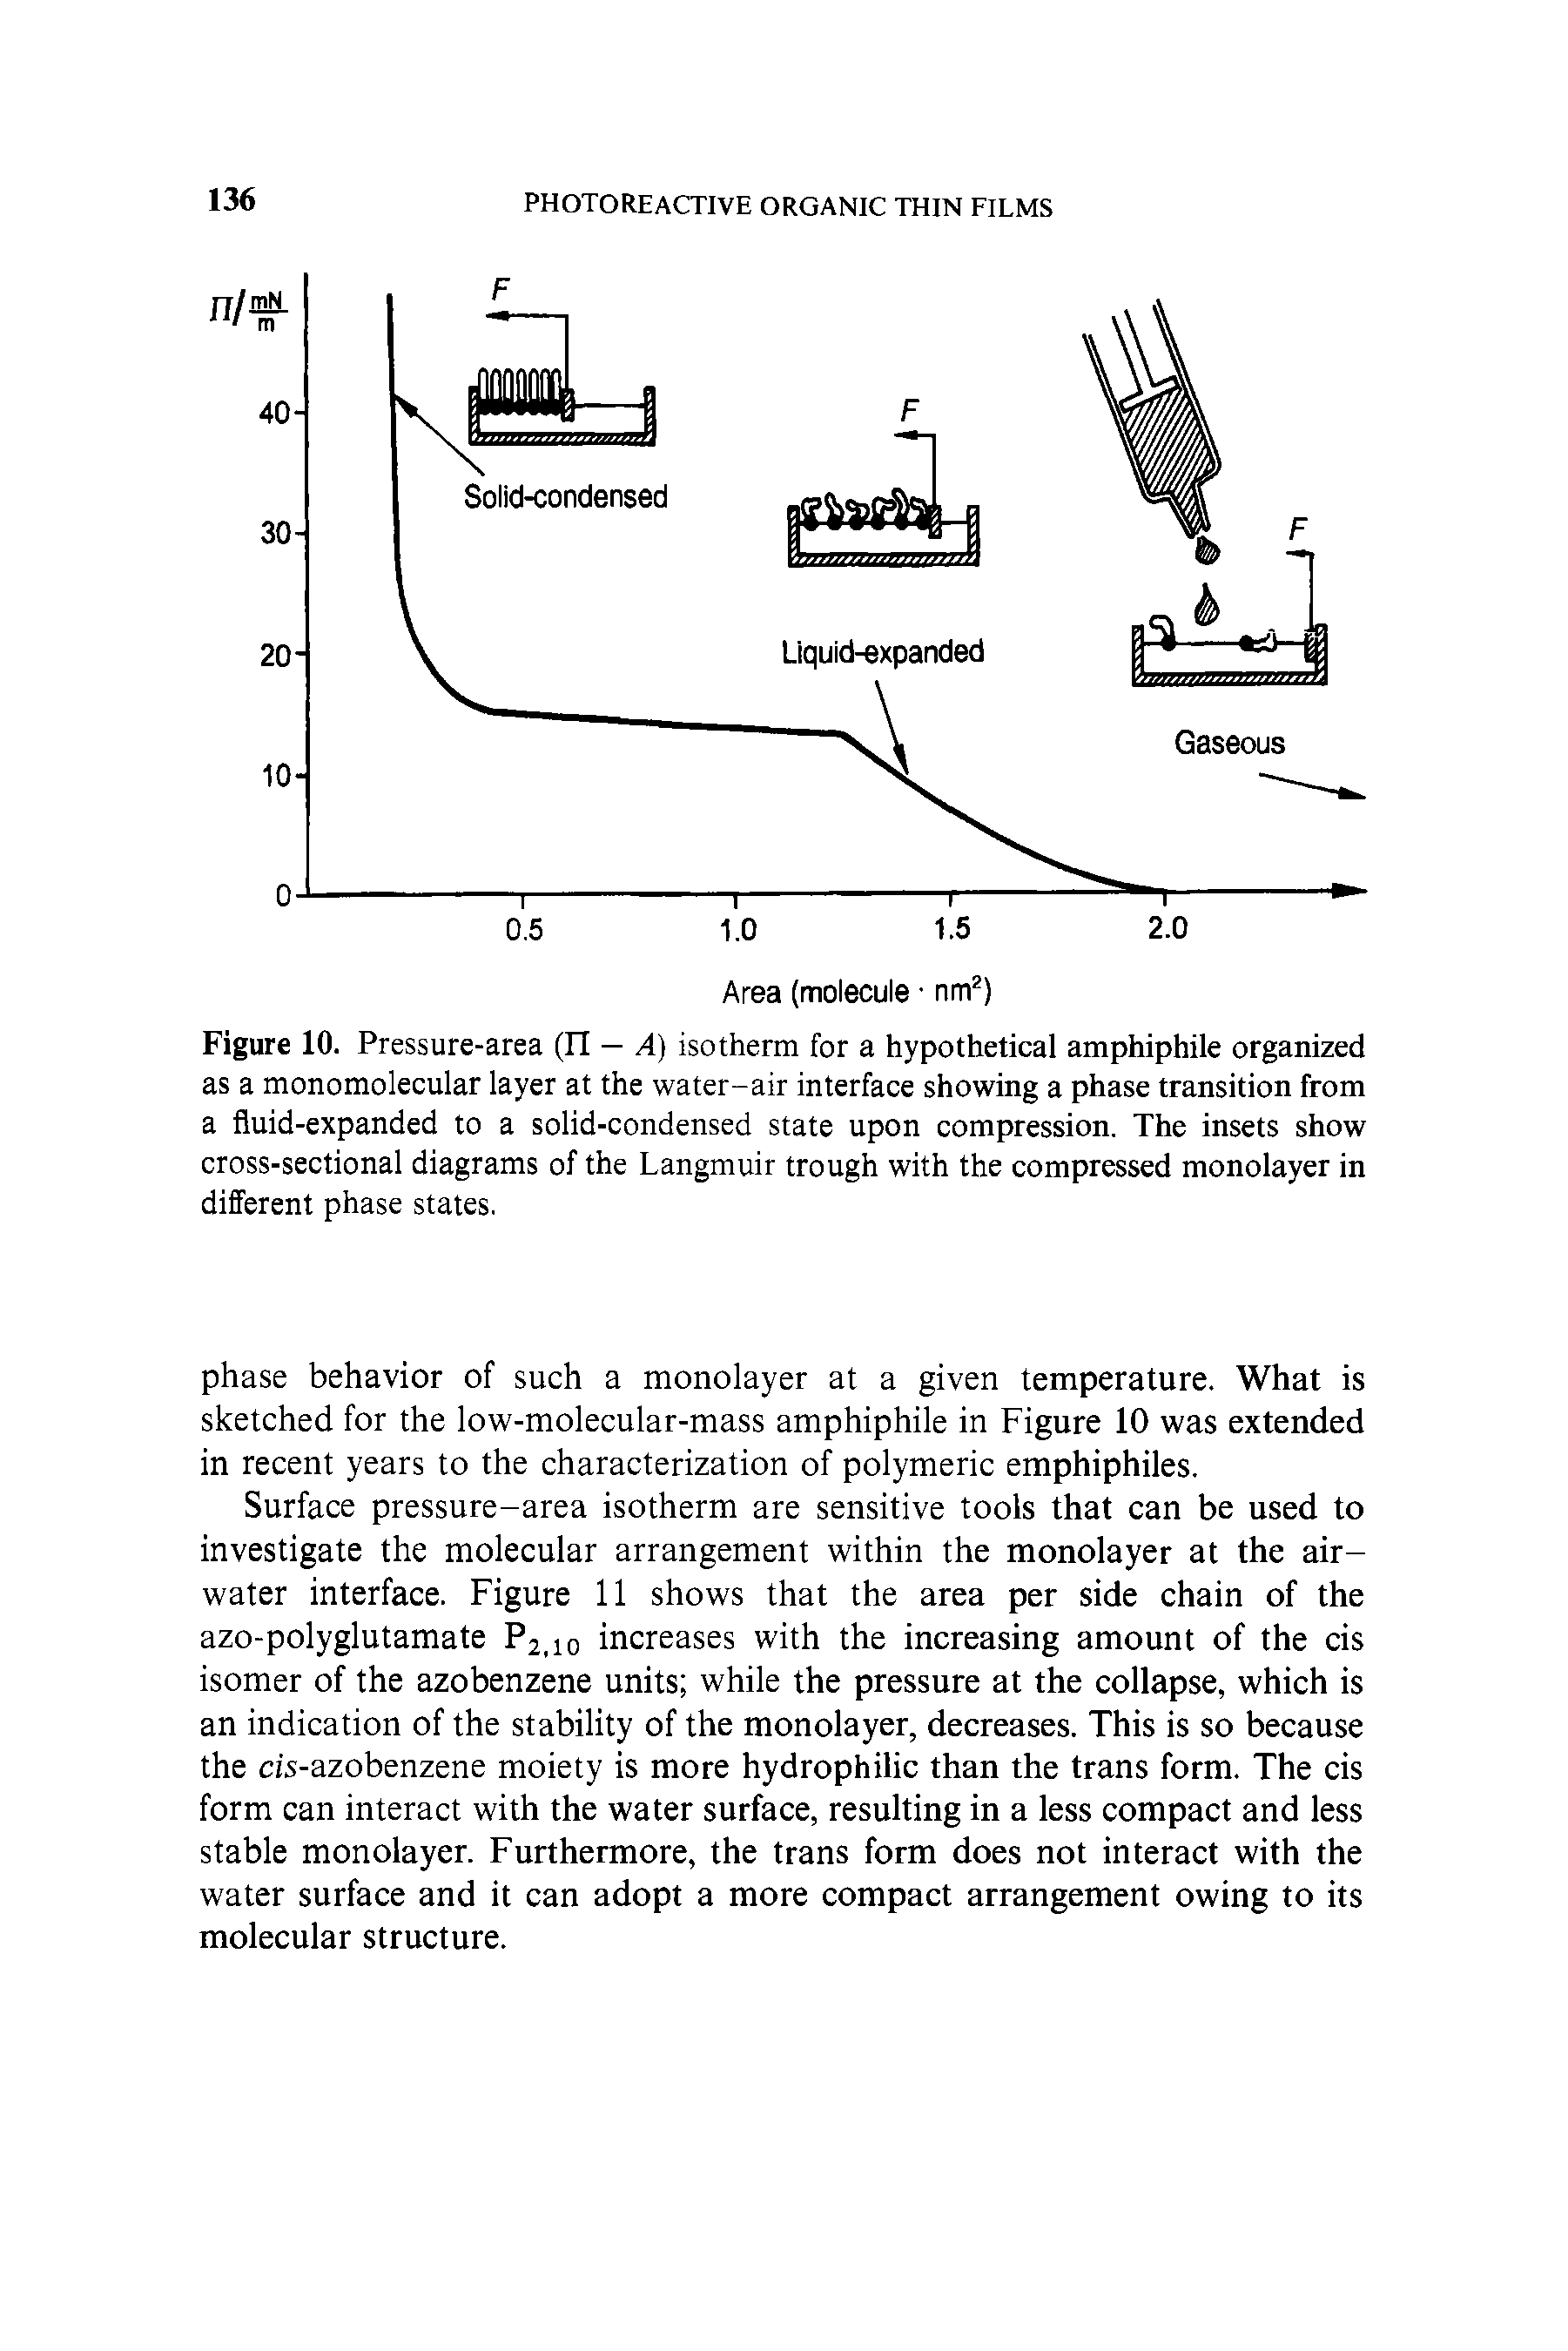 Figure 10. Pressure-area (IT — A) isotherm for a hypothetical amphiphile organized as a monomolecular layer at the water-air interface showing a phase transition from a fluid-expanded to a solid-condensed state upon compression. The insets show cross-sectional diagrams of the Langmuir trough with the compressed monolayer in different phase states.